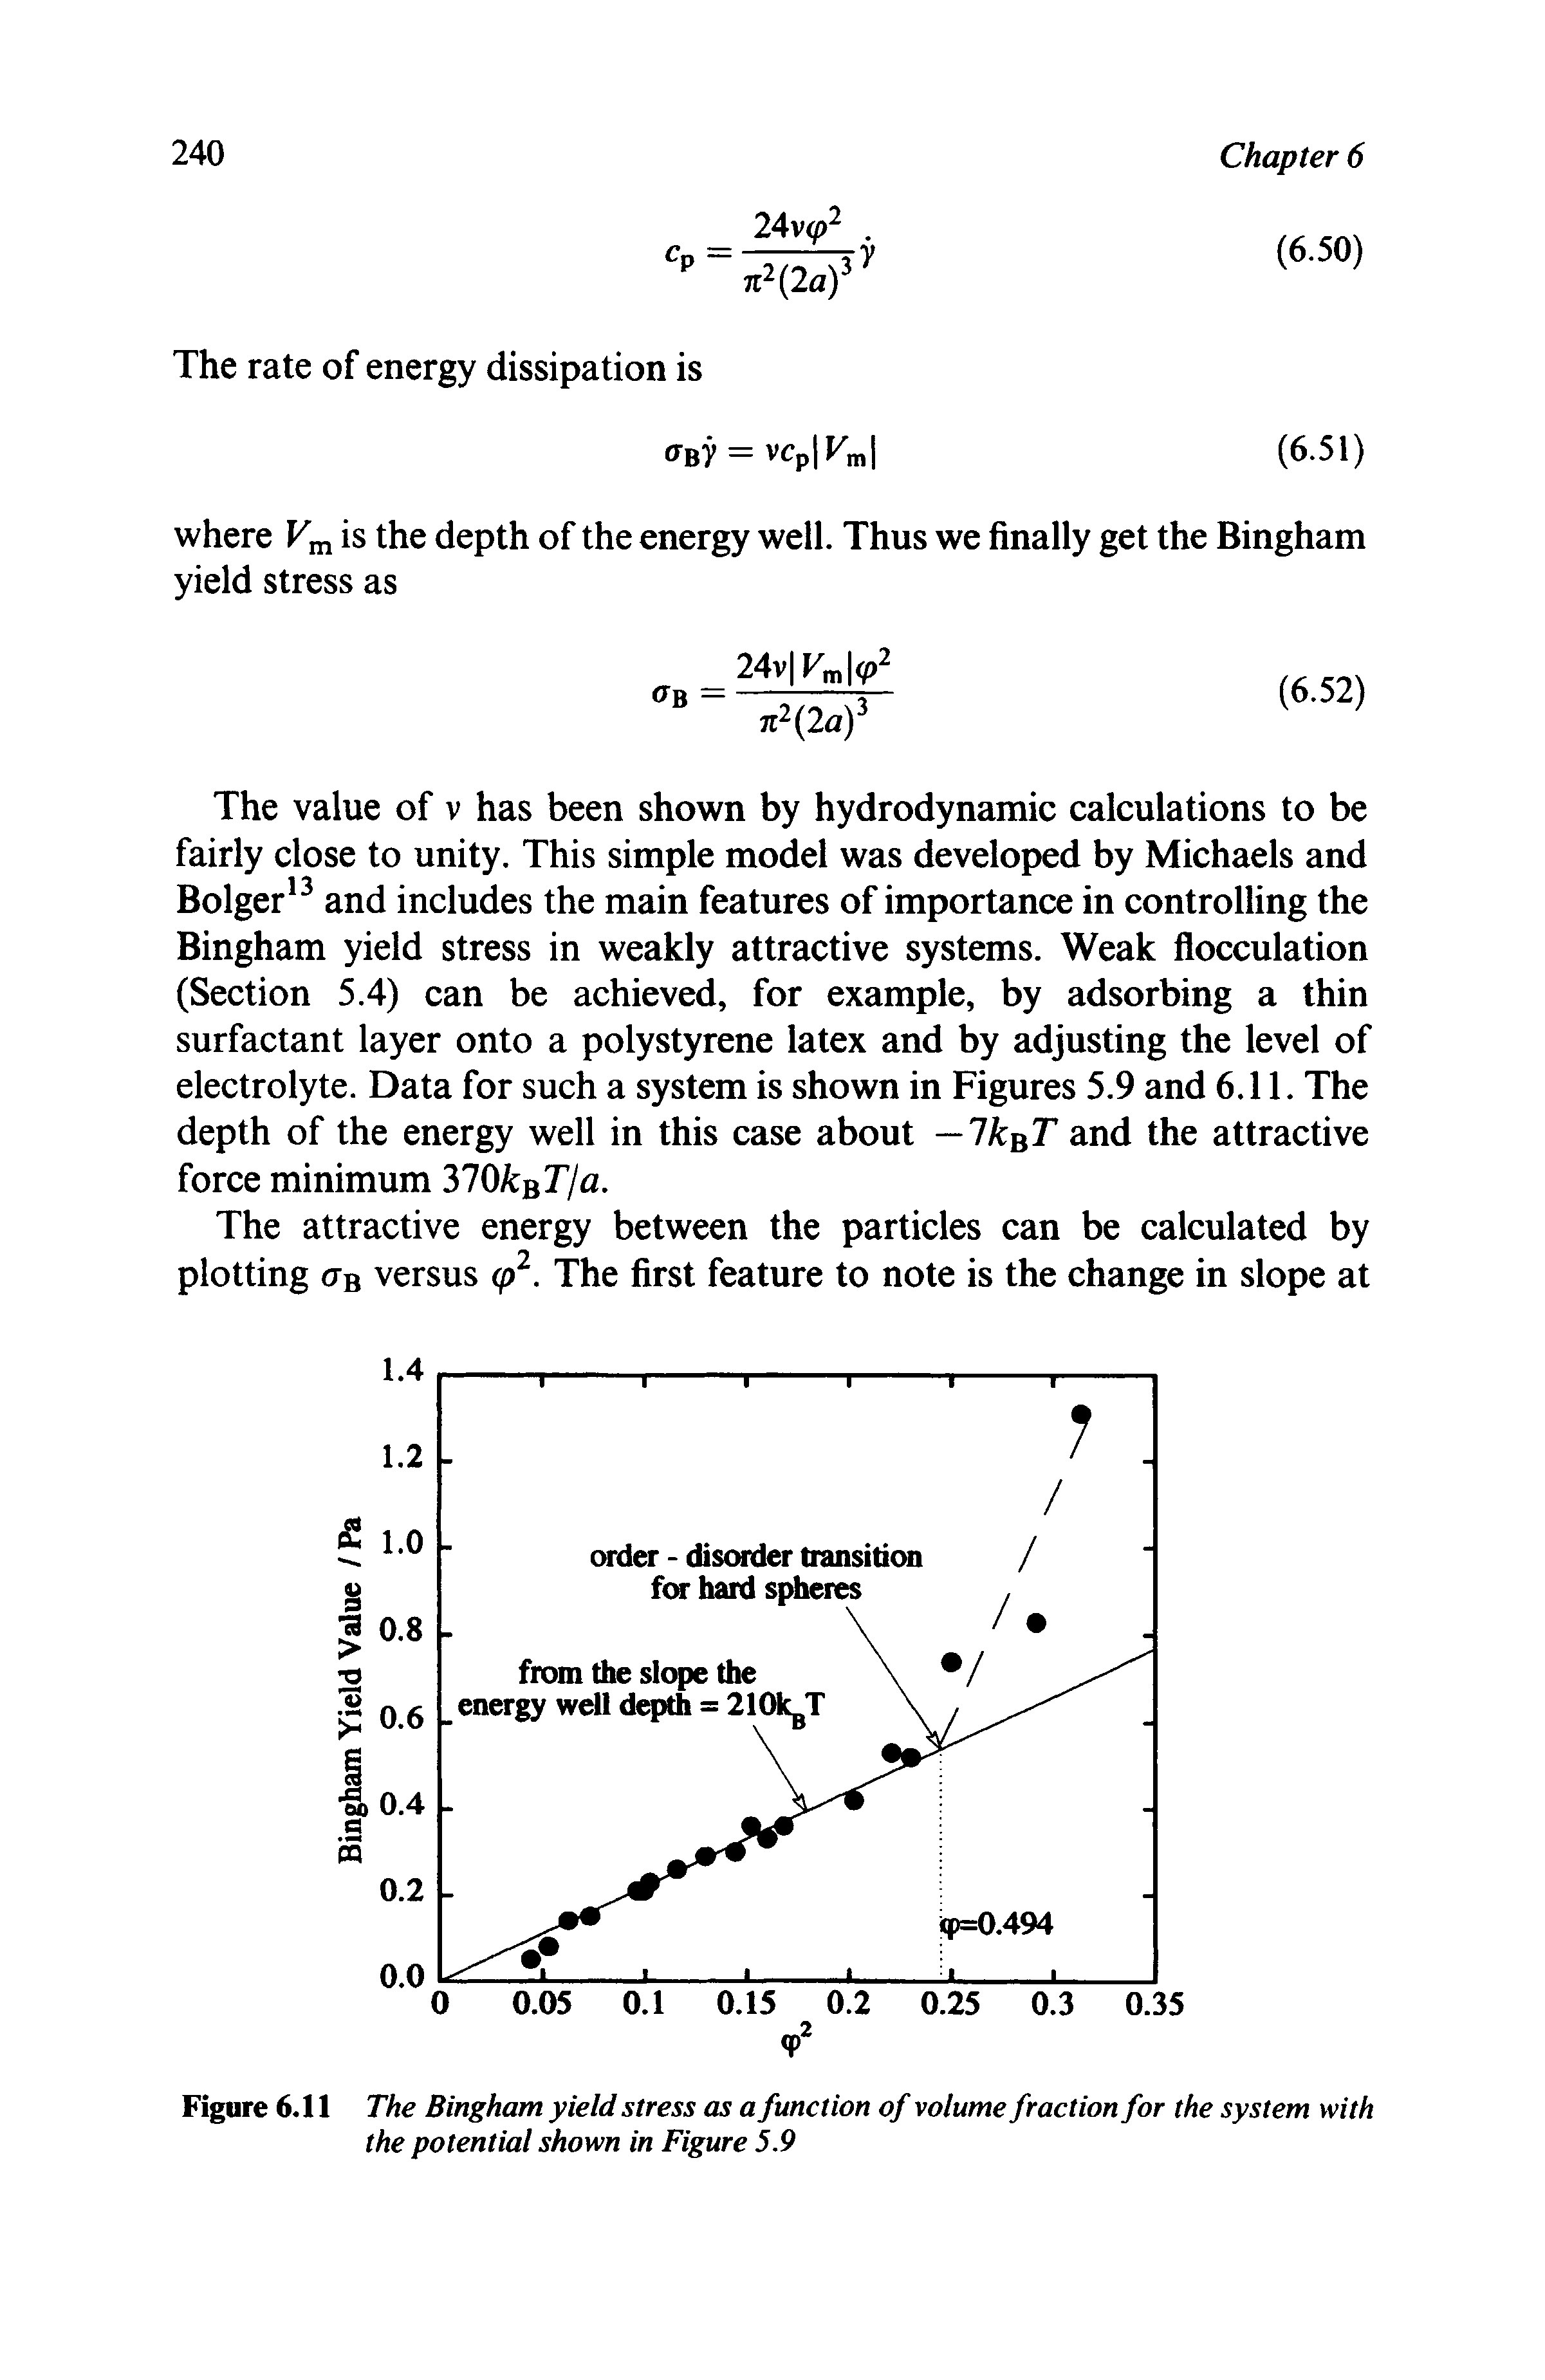 Figure 6.11 The Bingham yield stress as a function of volume fraction for the system with the potential shown in Figure 5.9...